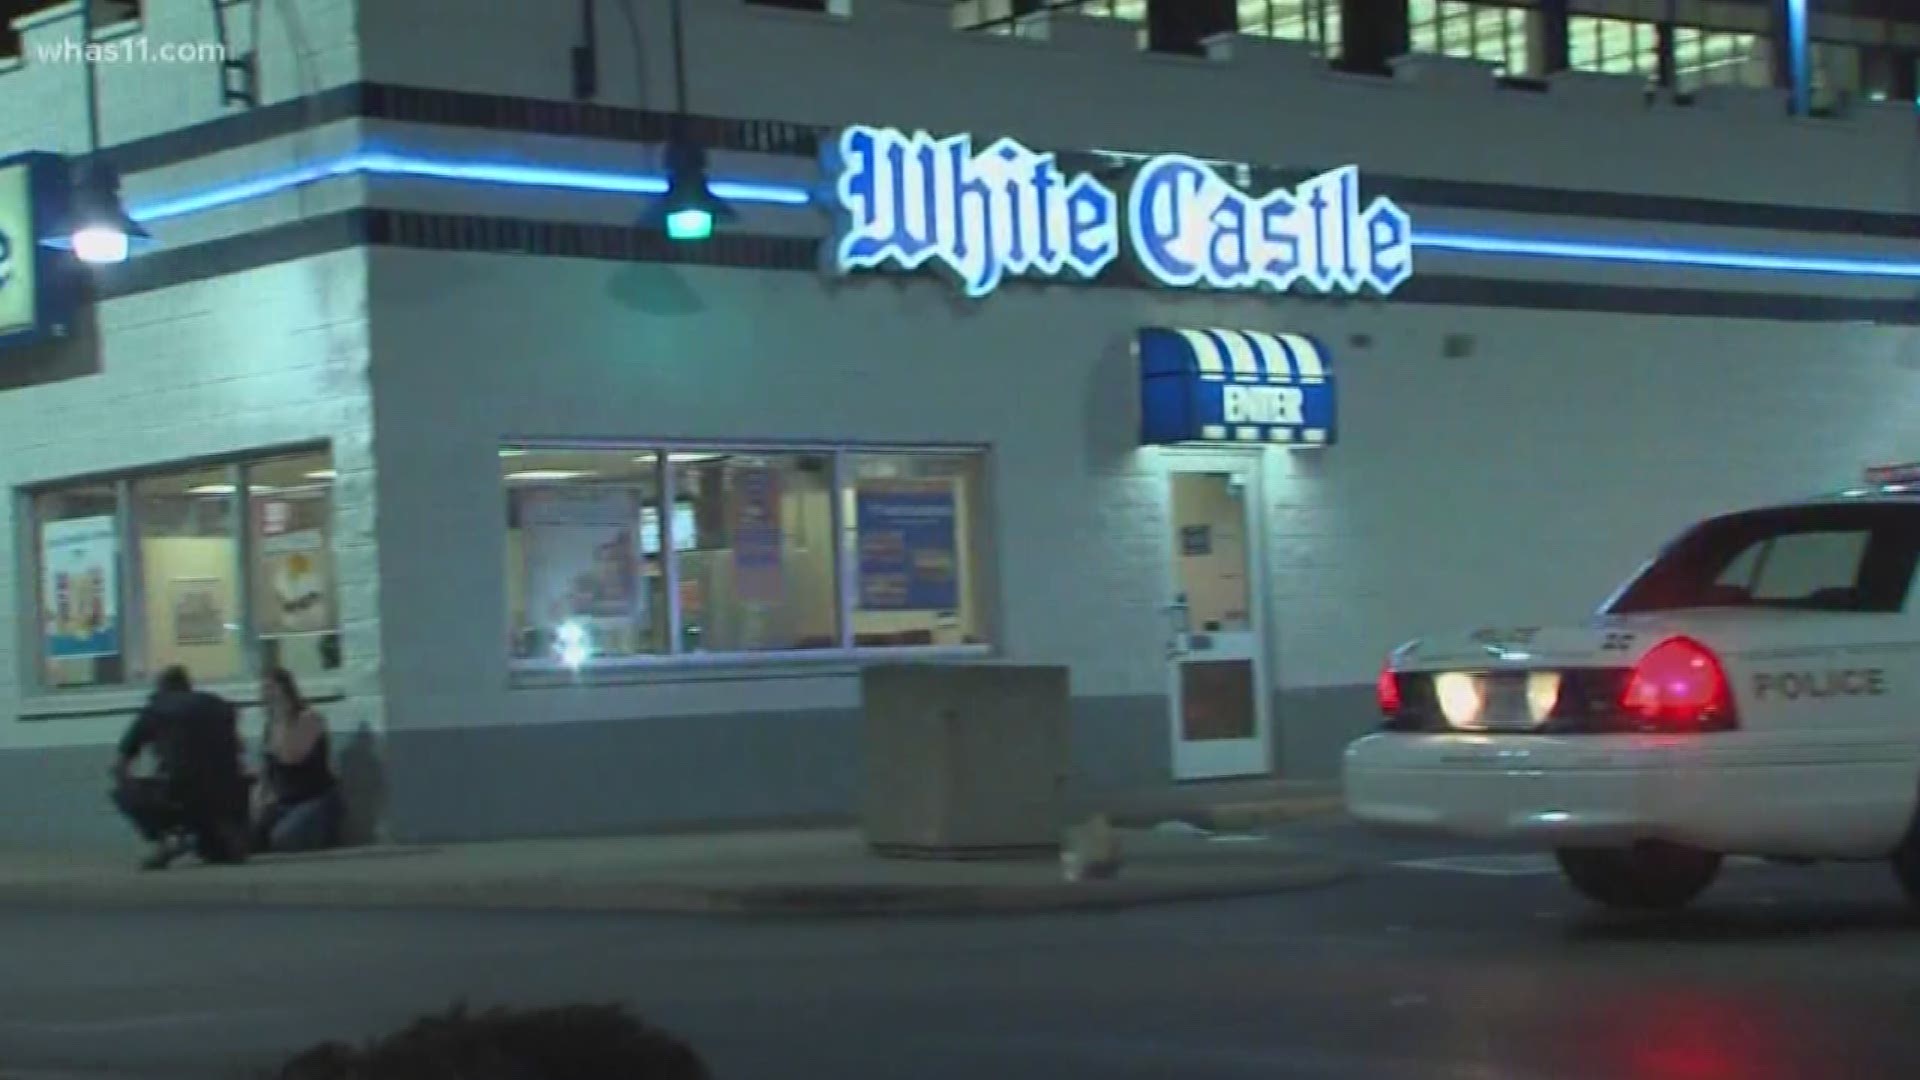 Two judges from Clark County, Indiana were shot and injured in the parking lot of a downtown Indianapolis White Castle.